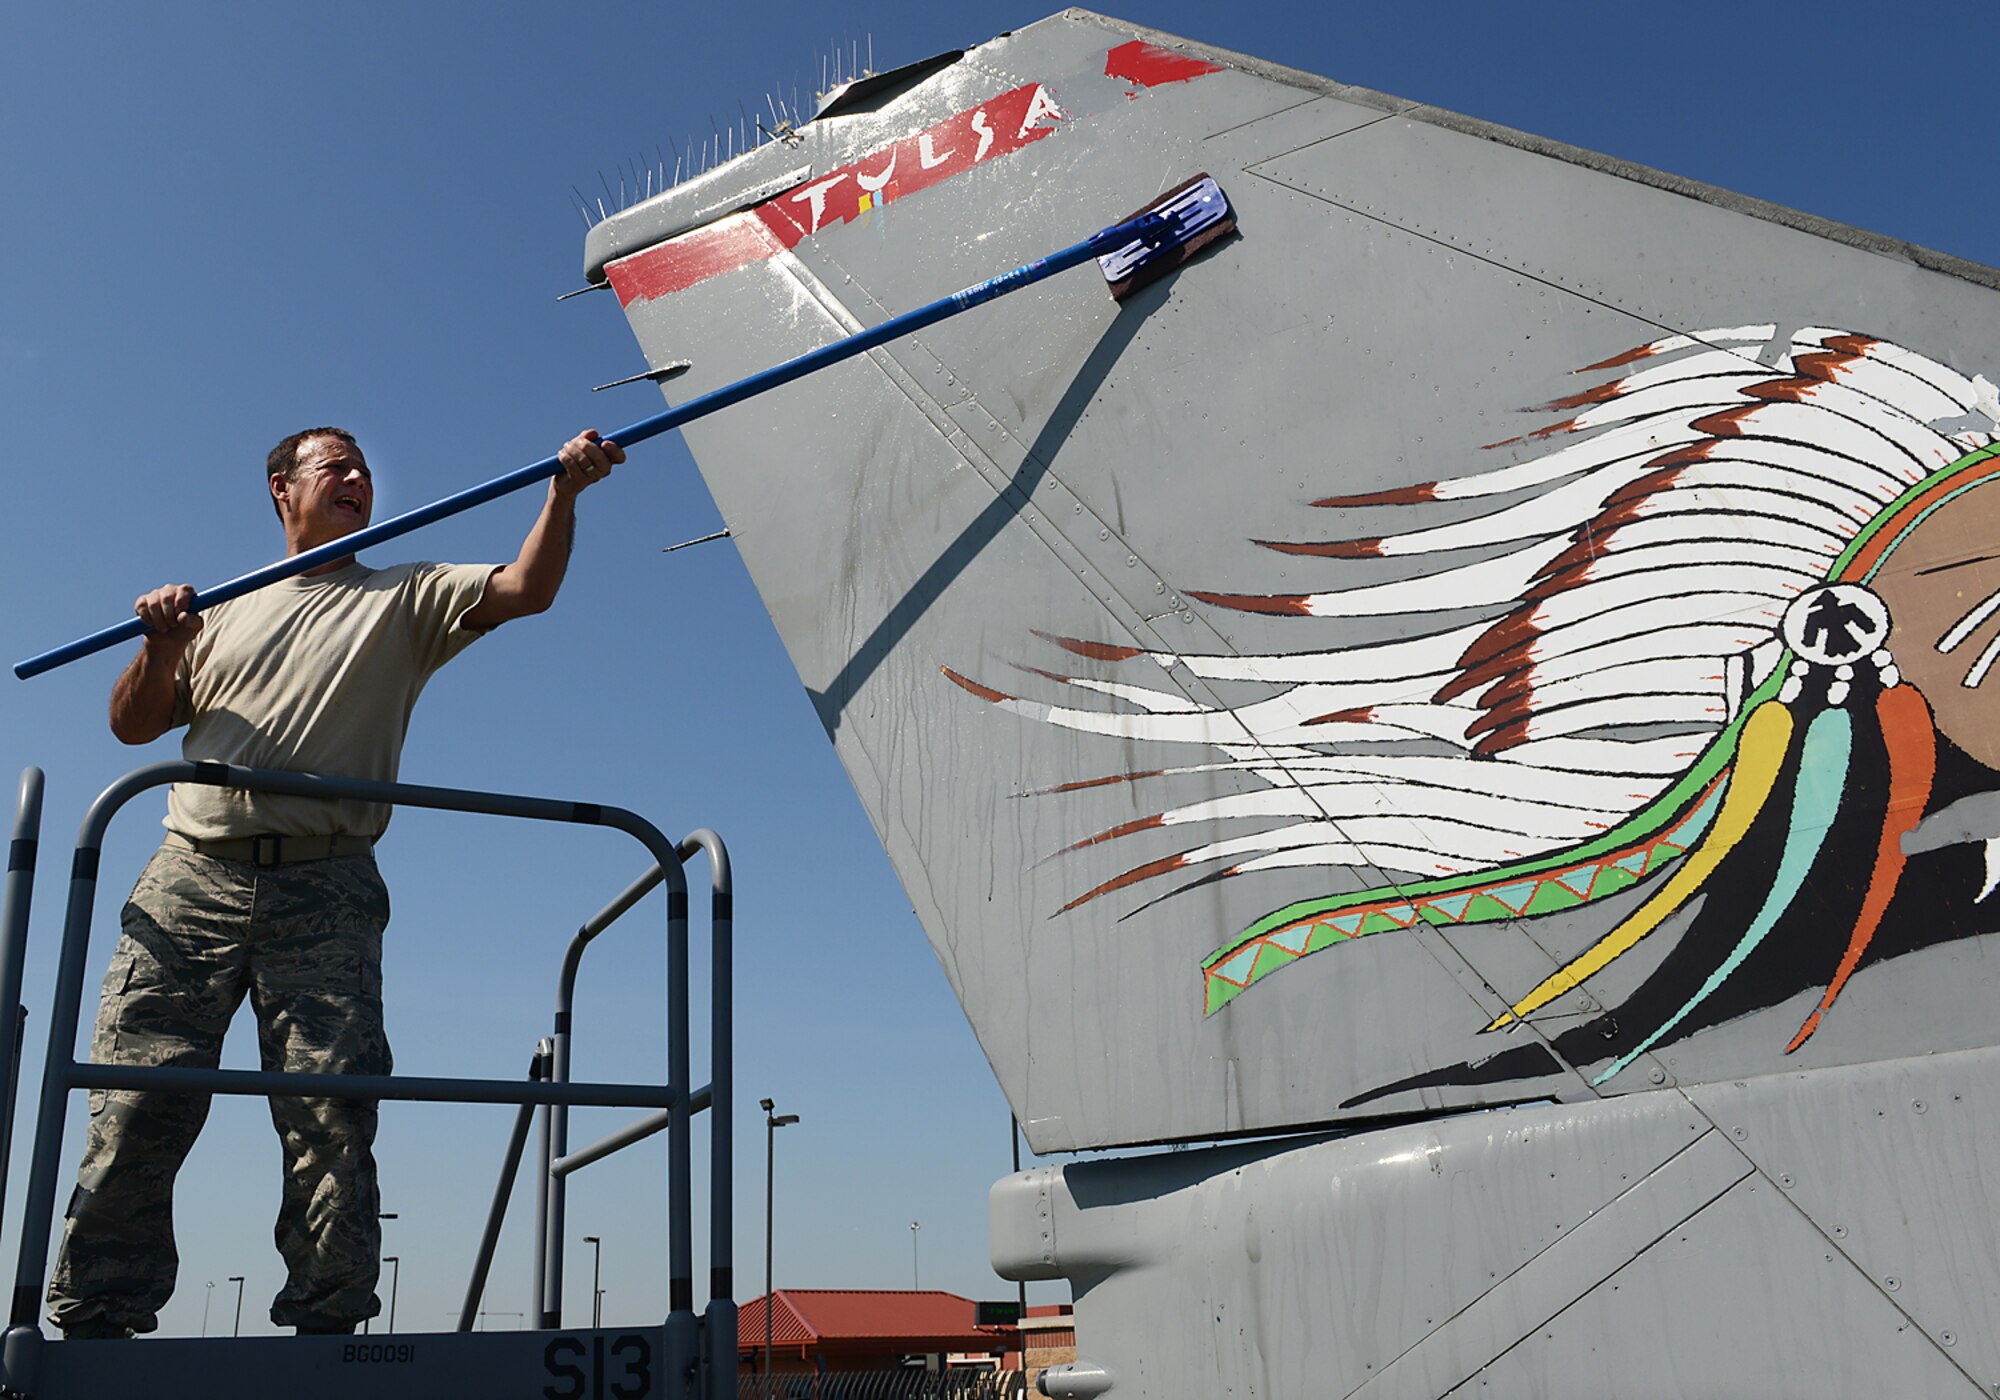 Chief Master Sergeant Brian Williams, 138th Maintenance Group Chief, scrubs the tail of an F-16 static display aircraft at the Tulsa Air National Guard base, Tulsa Okla., 29 July 2014.  Members of the 138th FW Chiefs Council gathered to wash the static aircraft in an effort to keep them looking nice for public display.  (U.S. National Guard photo by Senior Master Sgt.  Preston L. Chasteen/Released)